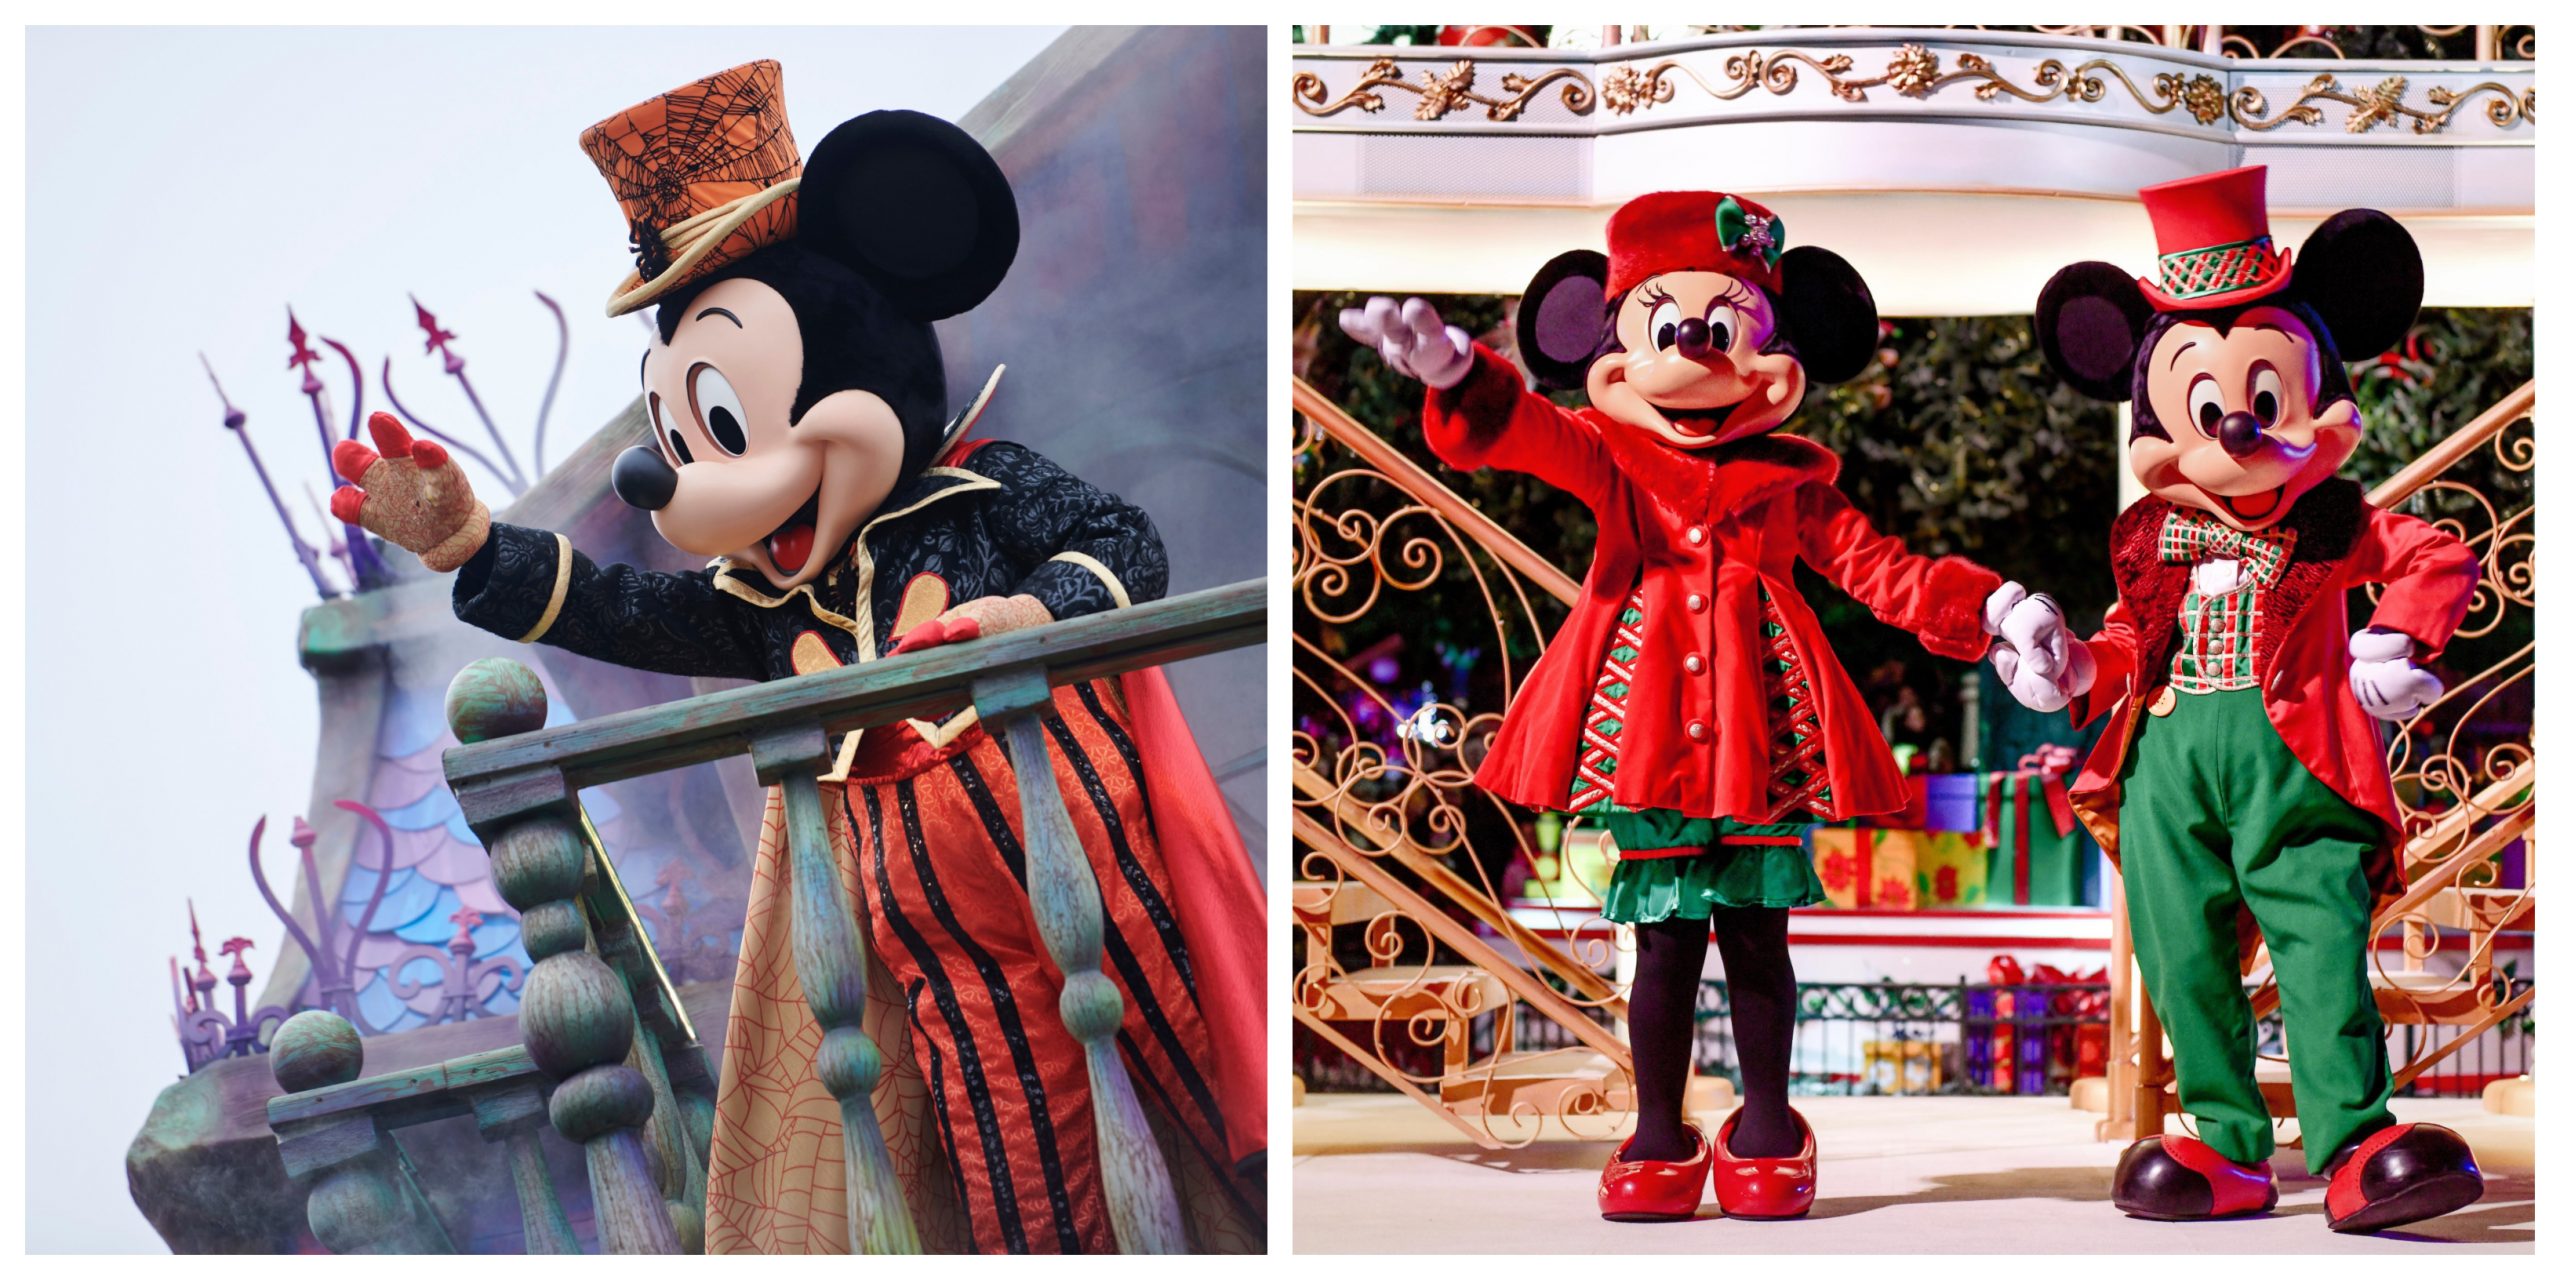 Disneyland Paris to host Halloween and Christmas events amidst COVID-19